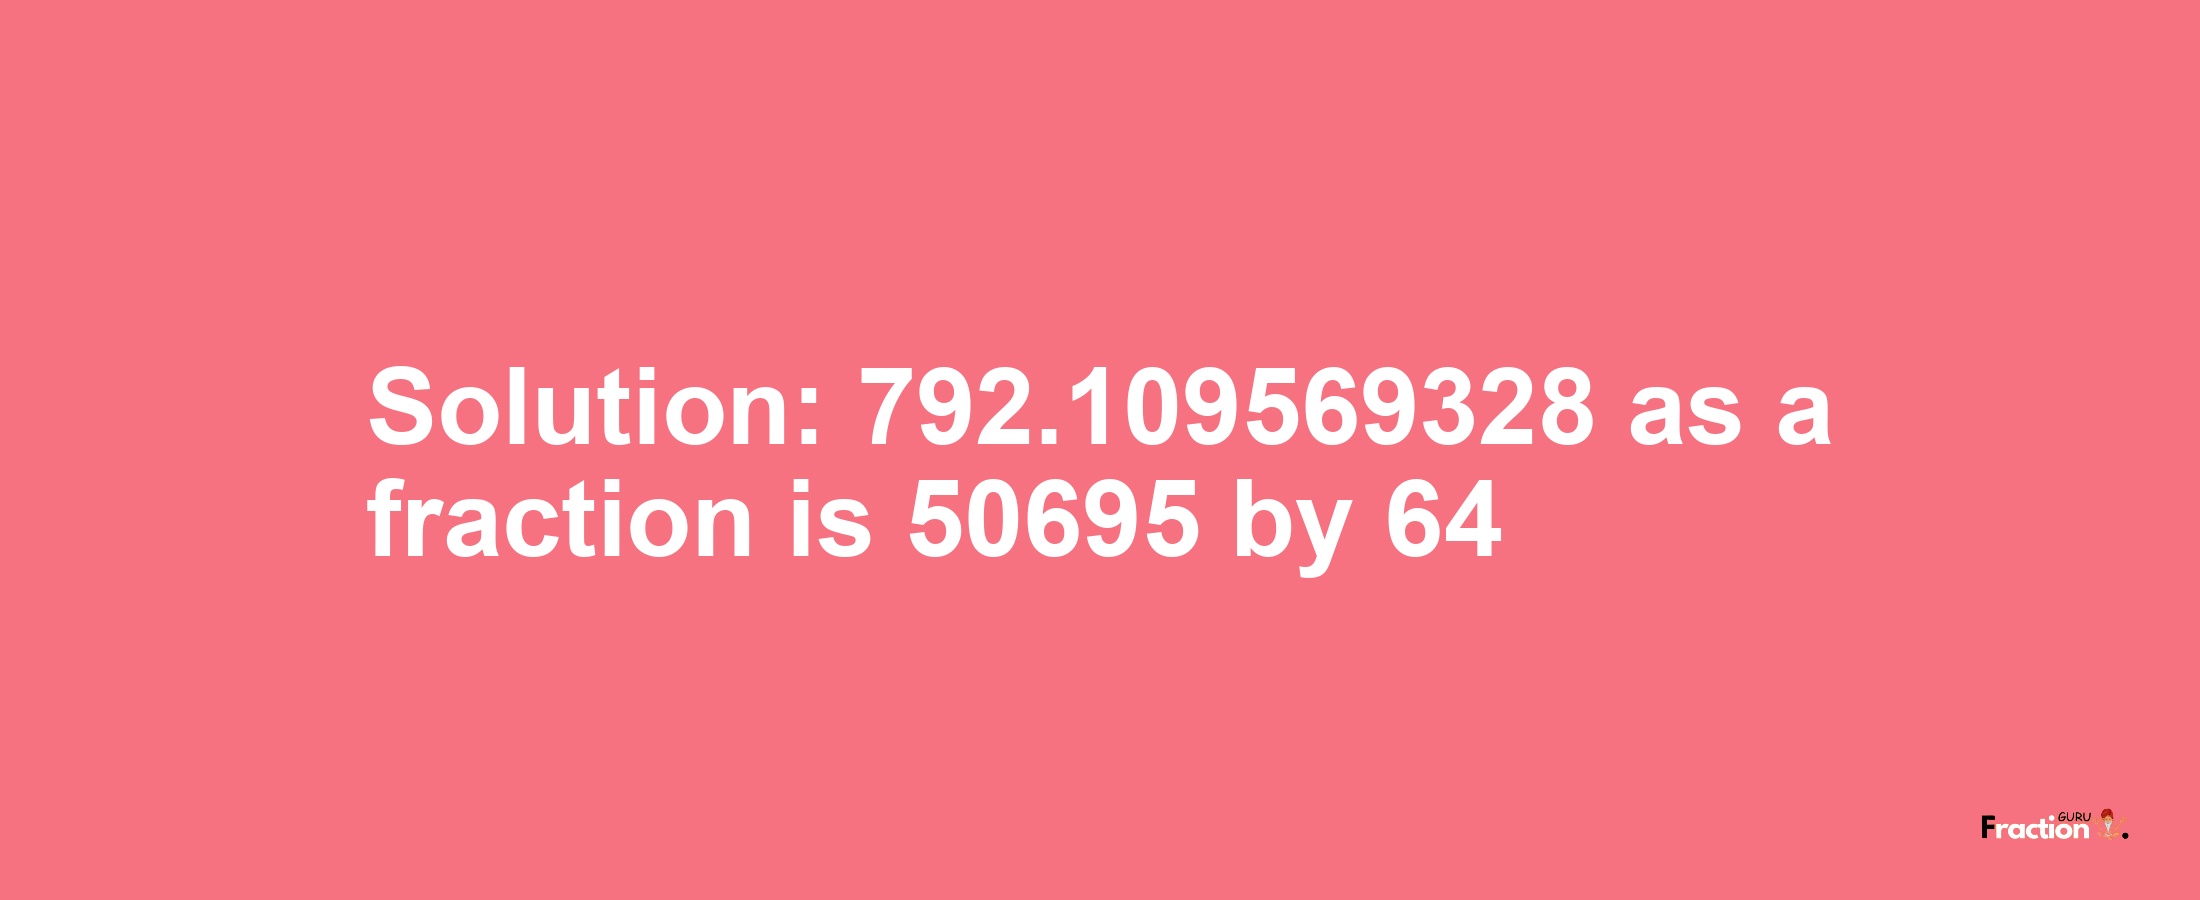 Solution:792.109569328 as a fraction is 50695/64